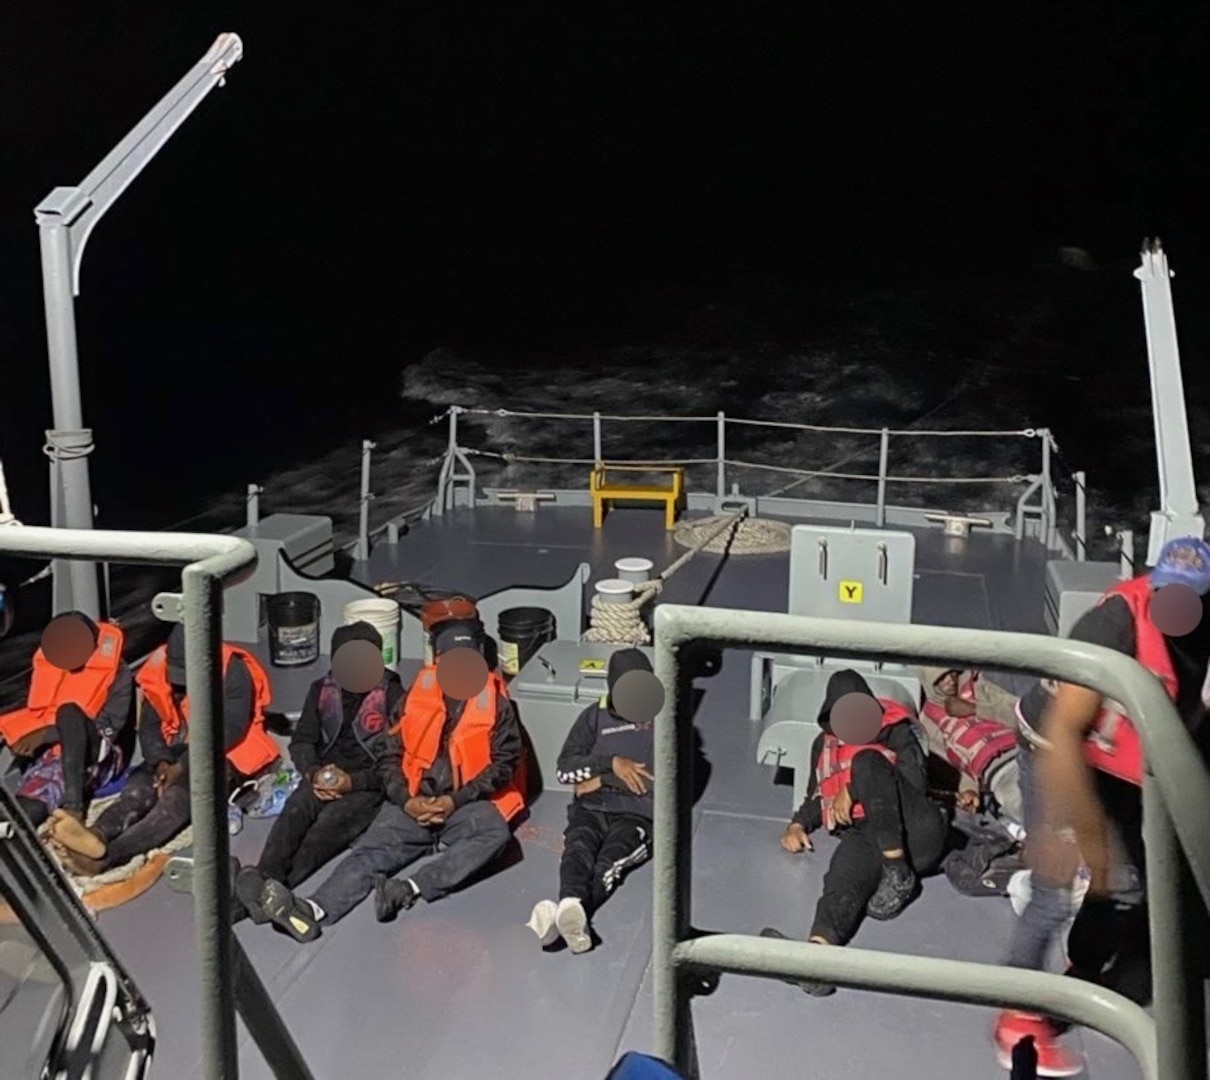 Photo of eight persons aboard a Dominican Republic Navy vessel after they were interdicted by the Coast Guard Cutter Winslow Griesser during an unlawful maritime migration voyage in the Mona Passage, April 19, 2024. Following the interdiction, Dominican Republic Navy authorities detained three U.S. citizens from this voyage, who reportedly are wanted in connection with a July 2020 shooting at a residential community in Puerto Rico, where four people were killed. U.S. Marshals Service authorities are coordinating the extradition of the three suspects to the U.S. territory of Puerto Rico. (Courtesy Photo)